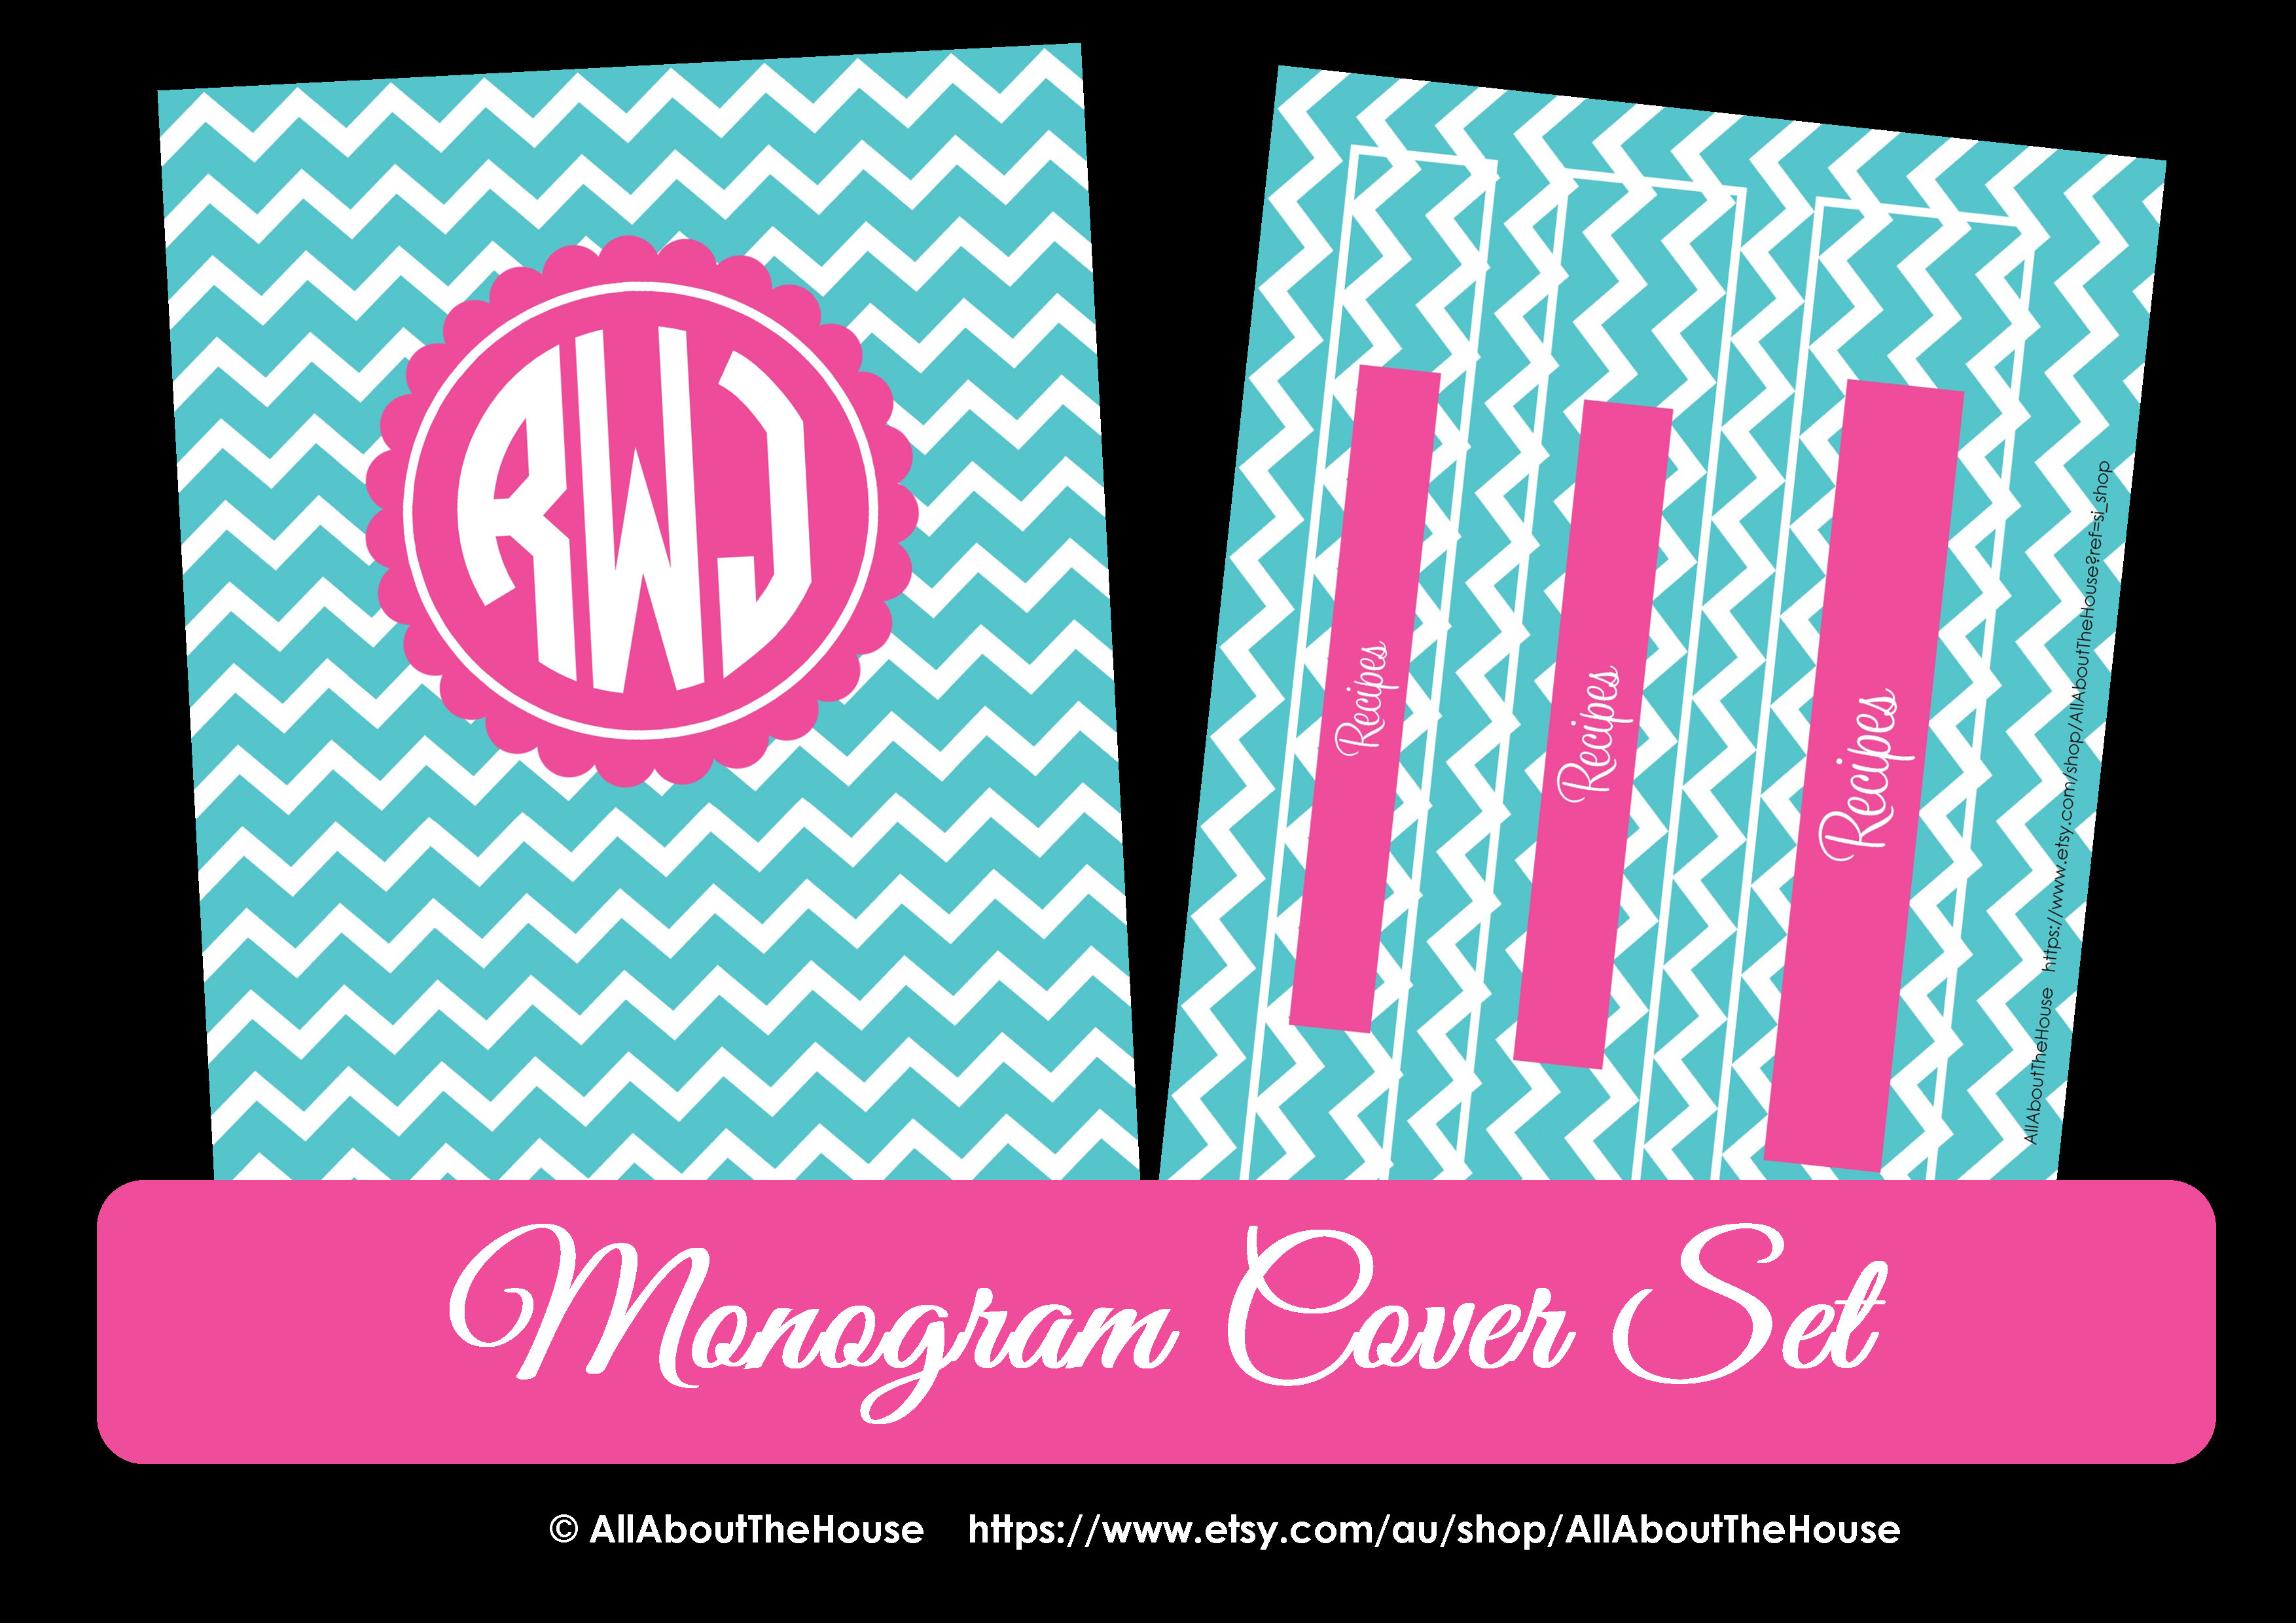 https://www.etsy.com/au/listing/161158784/monogram-printable-binder-cover-and?ref=related-0